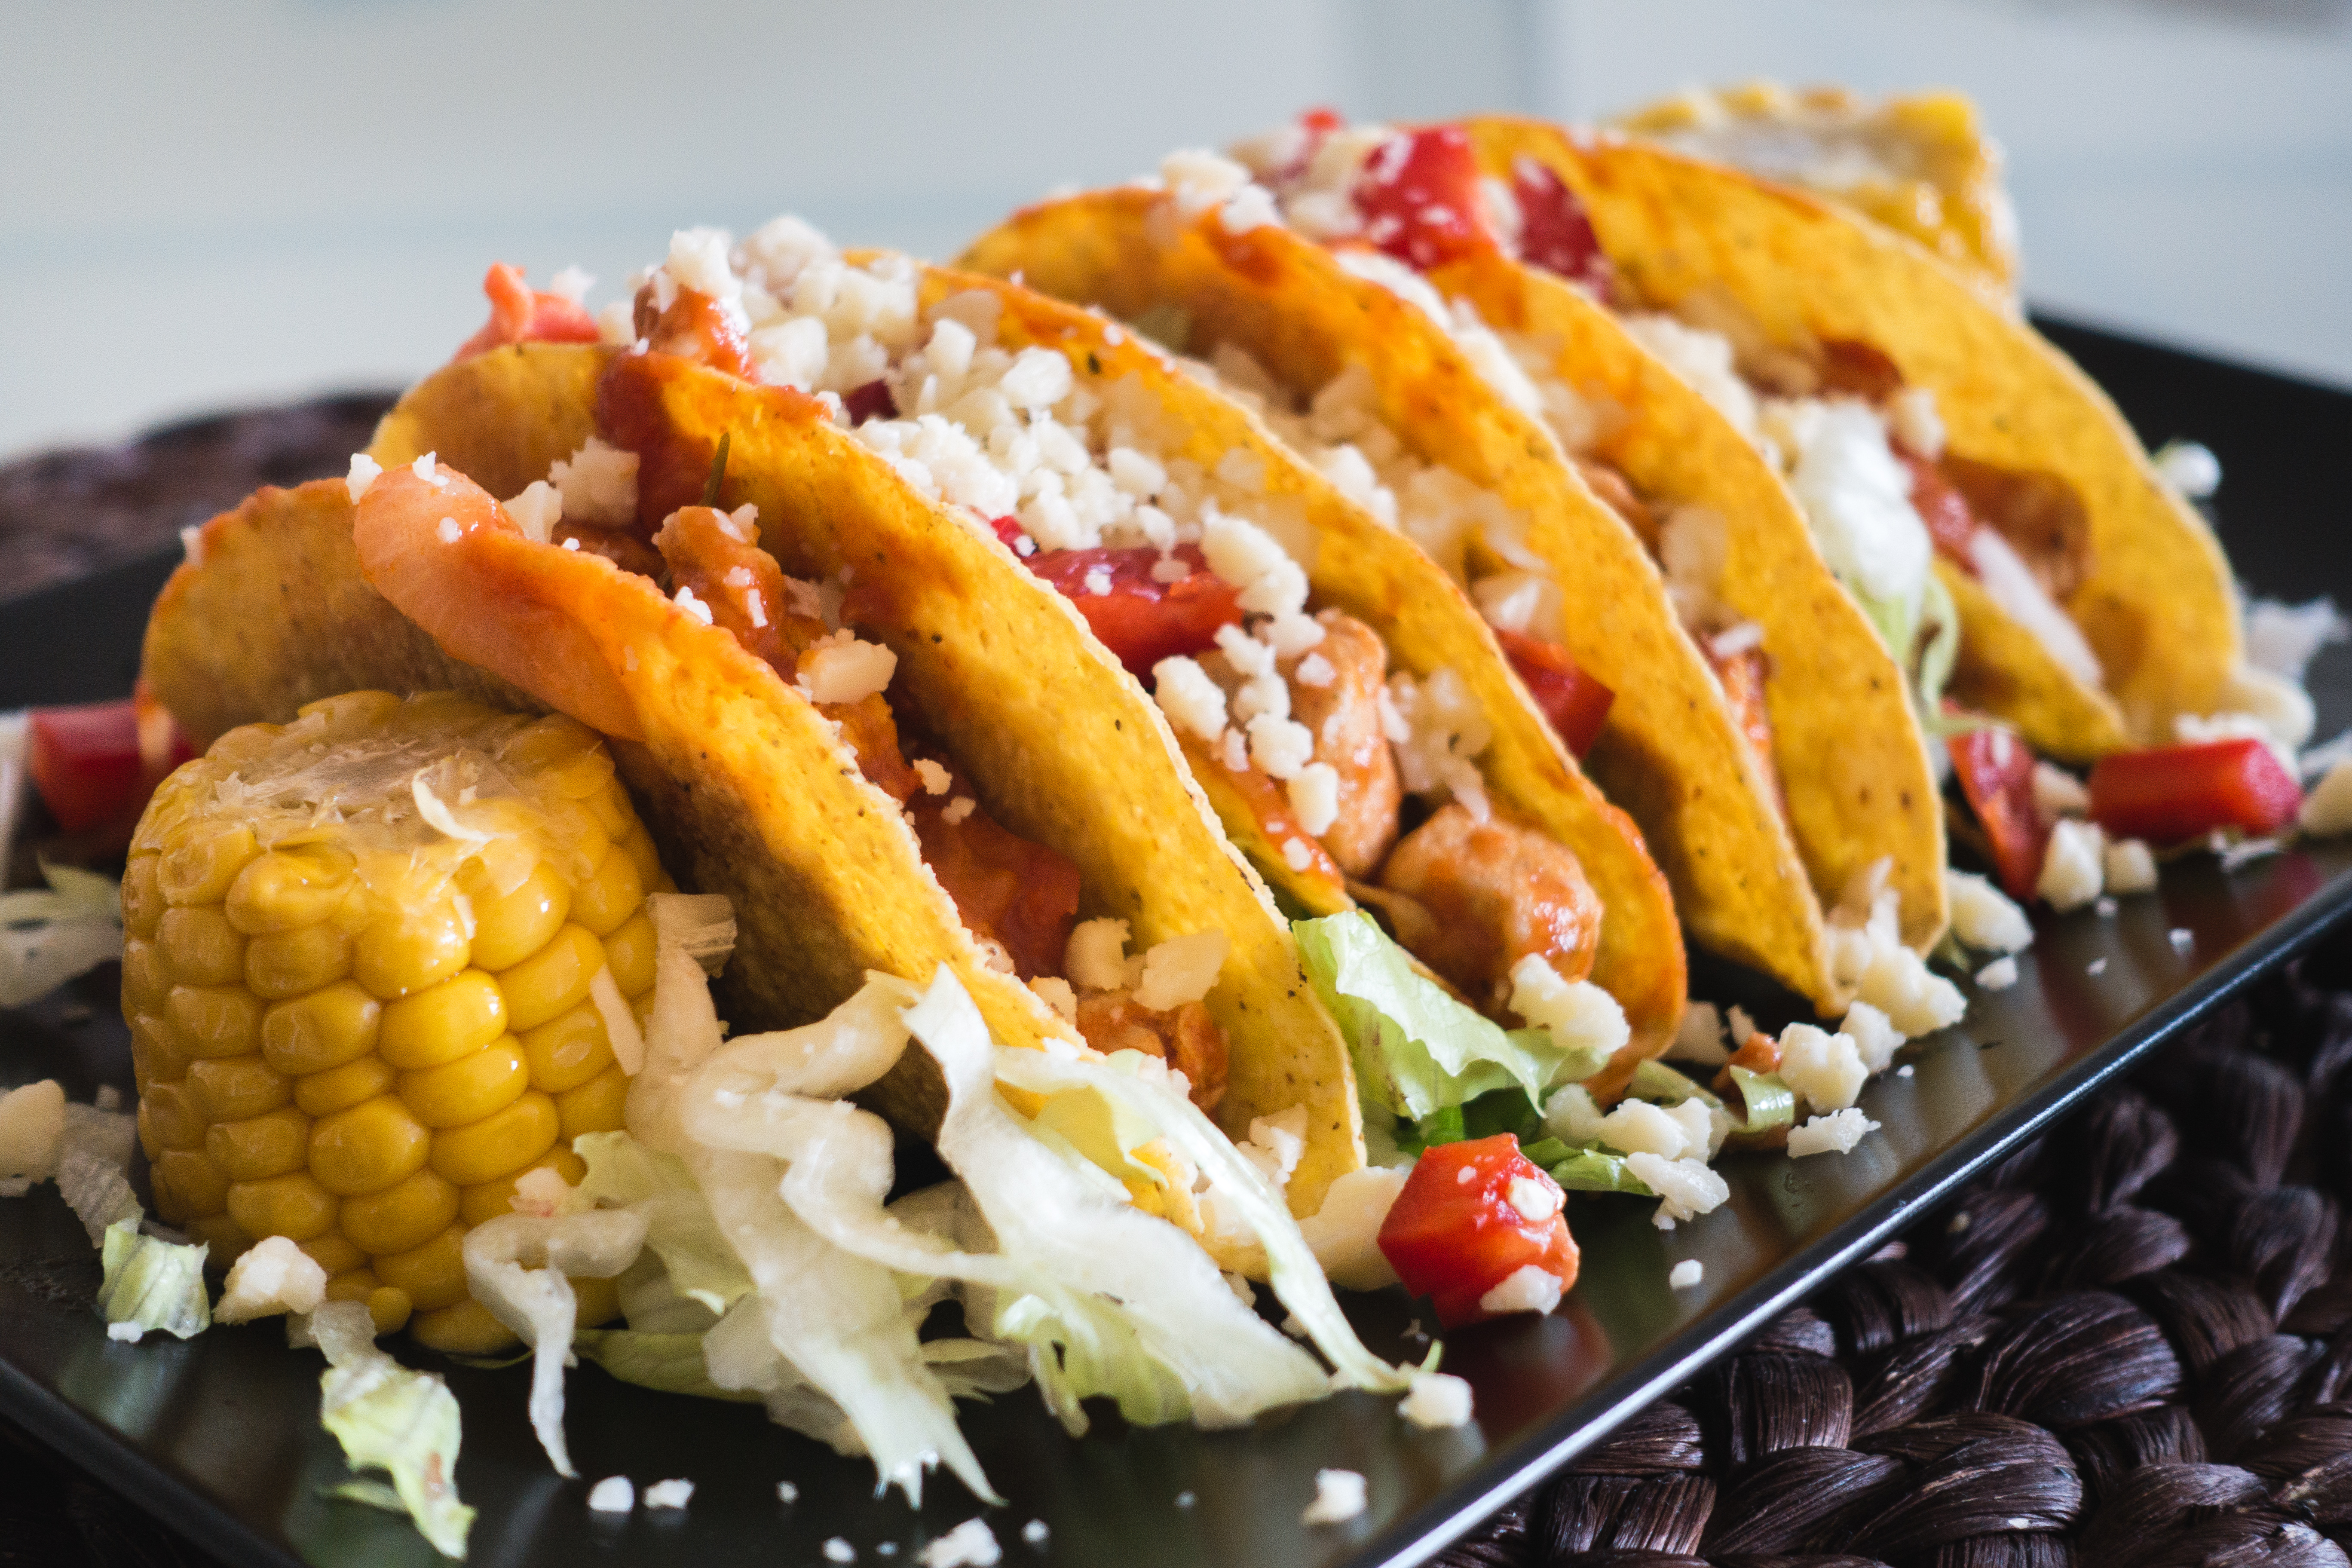 Tasty chicken tacos with cheese by Jakub Kapusnak